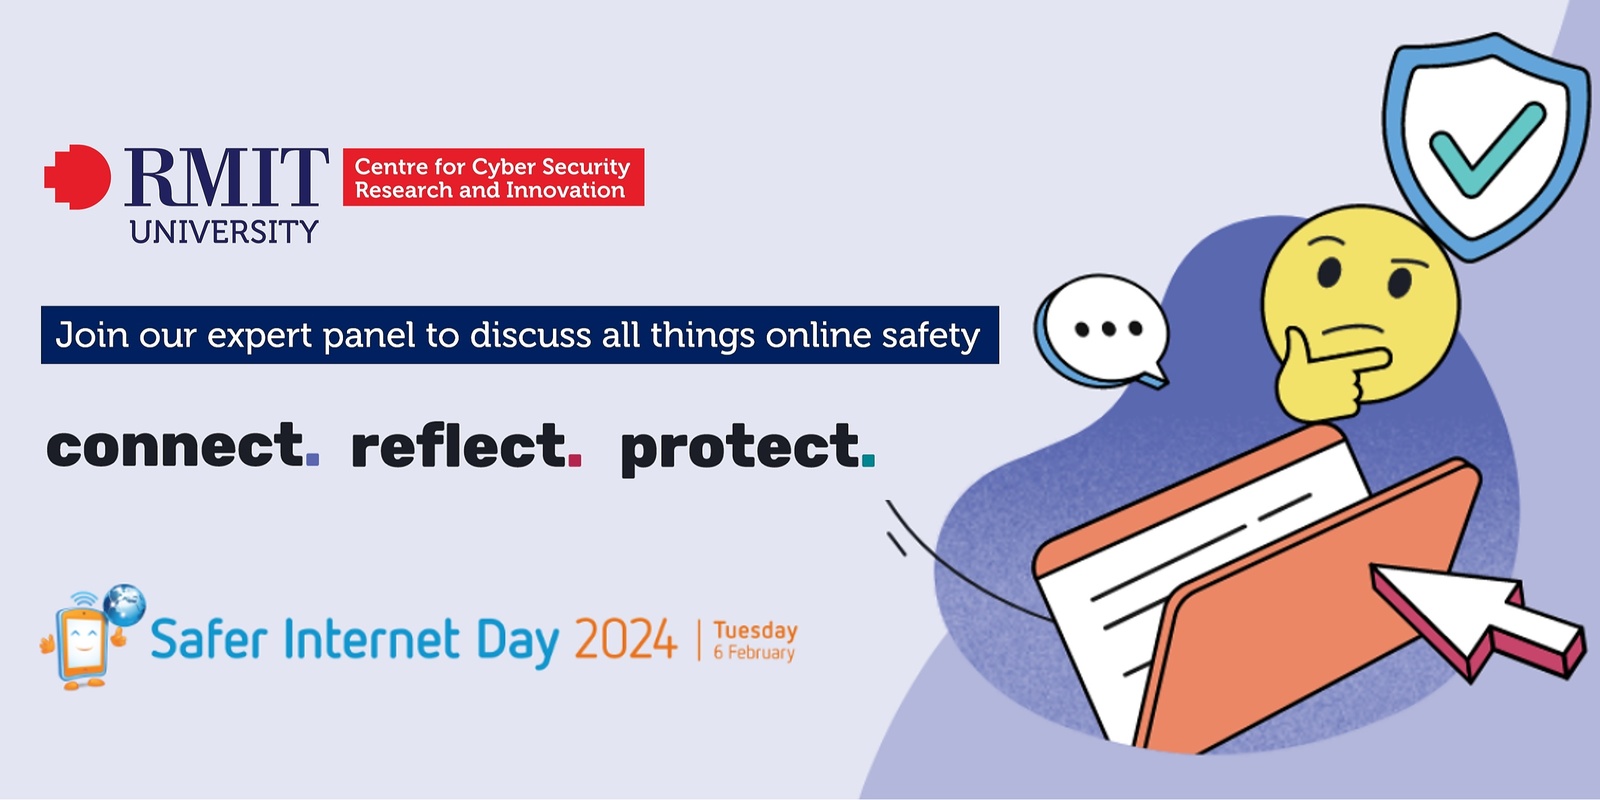 Banner image for Safer Internet Day - RMIT Centre for Cyber Security Research and Innovation